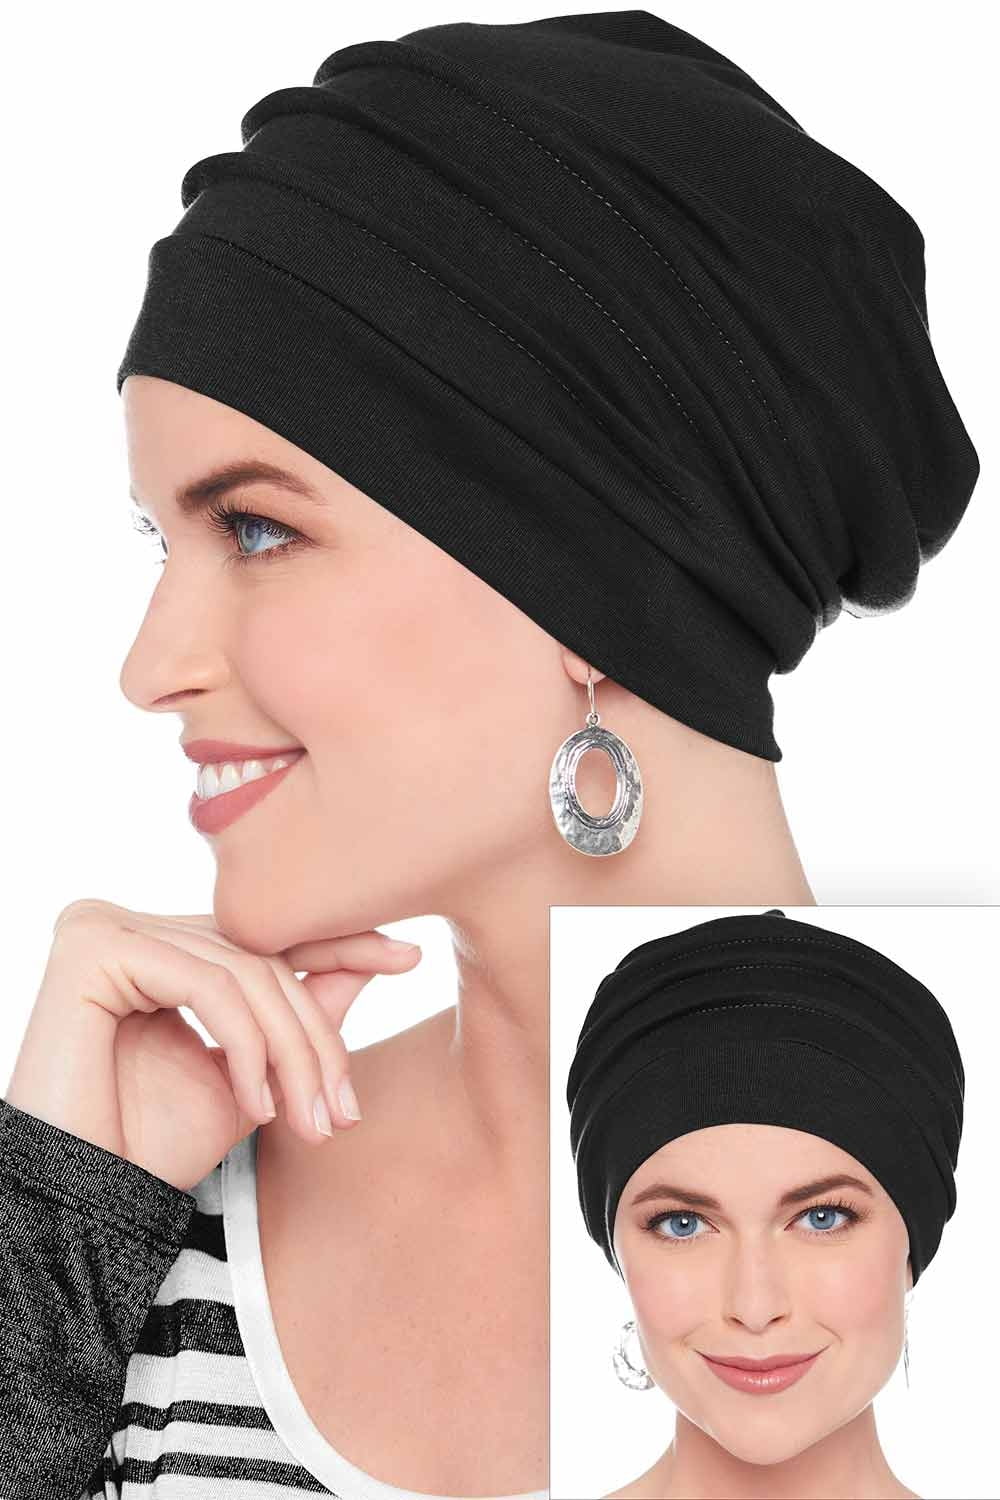 Black Be Sparkle Headcover Slouchy Snood-Cancer Headwear for Women